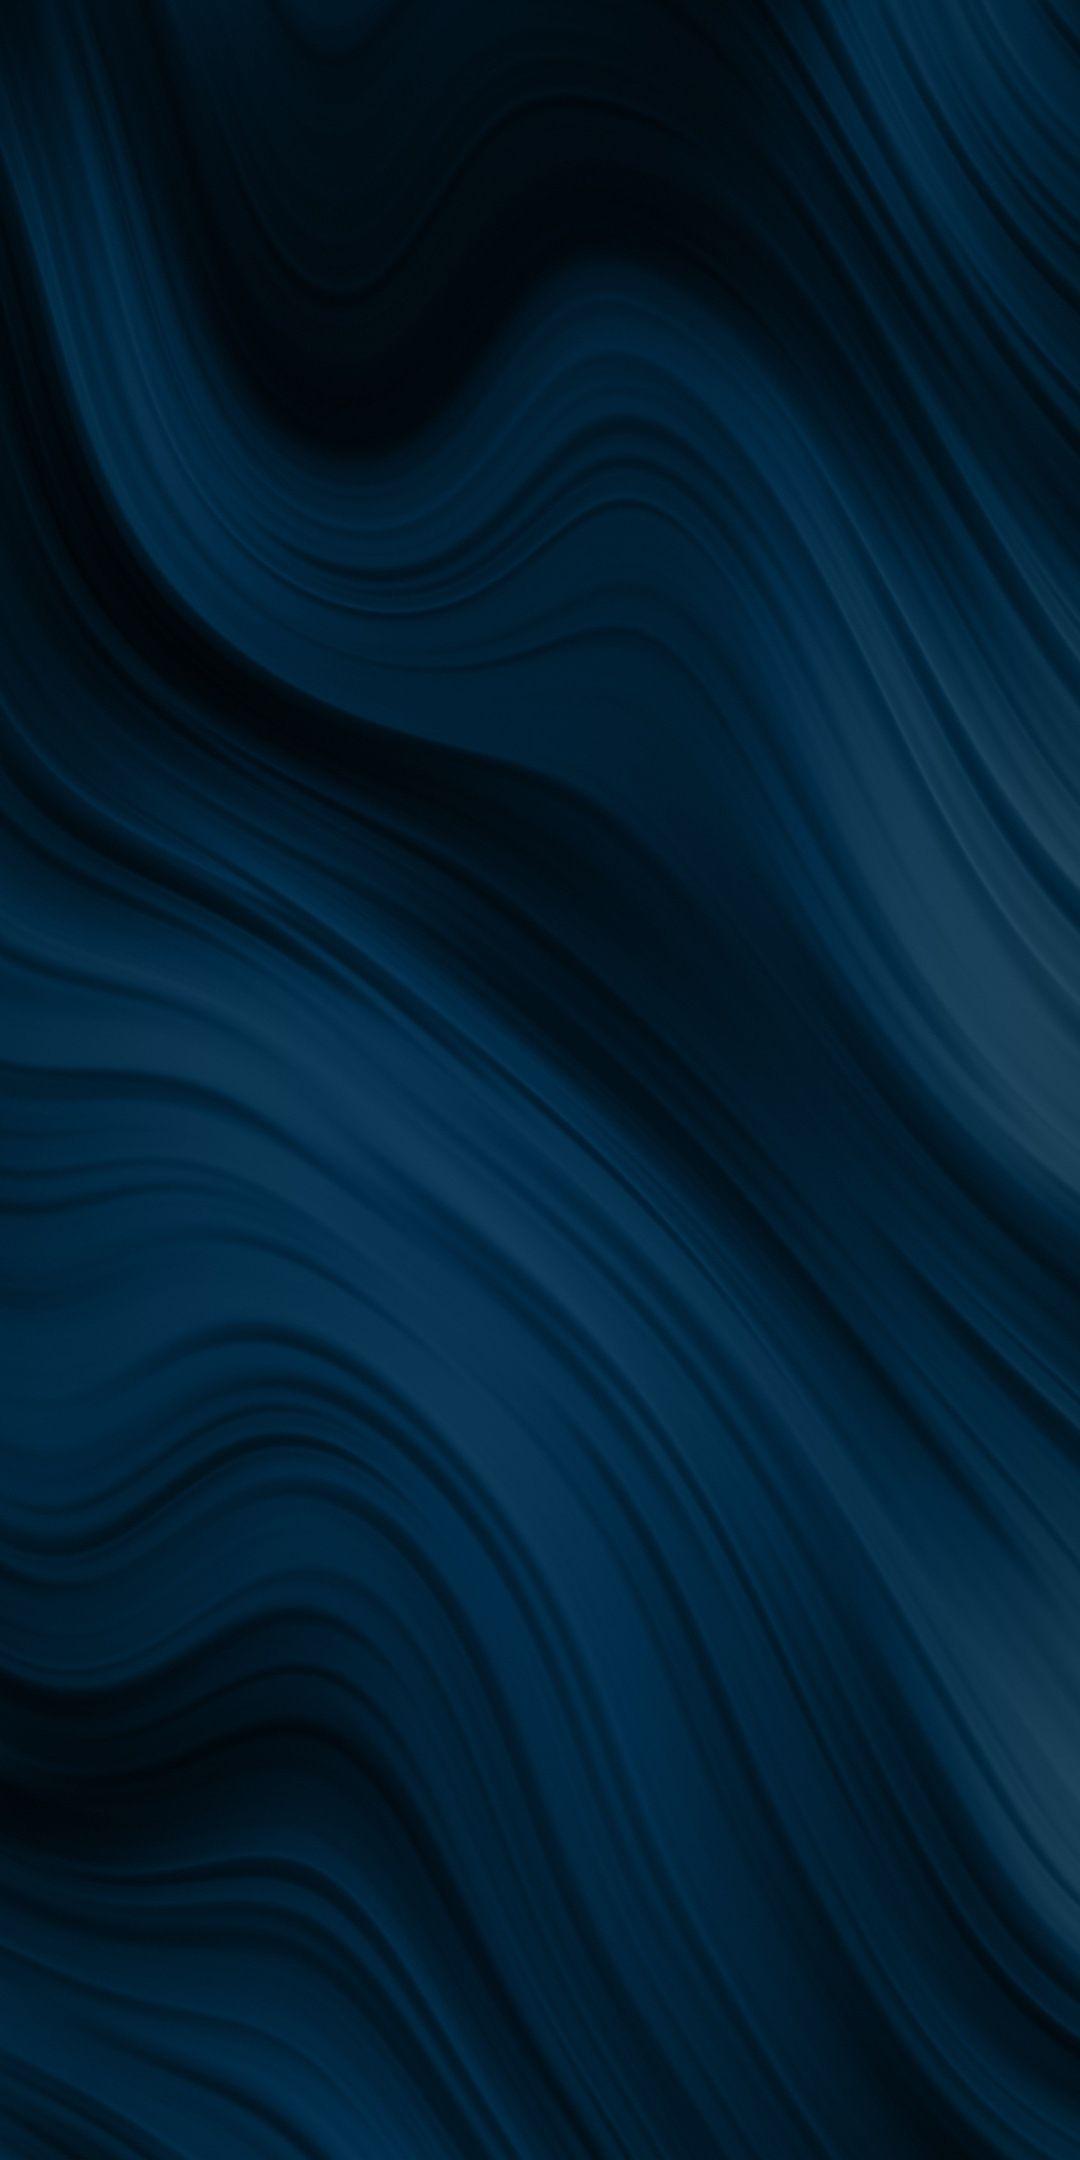 Dark, curvy lines, waves, abstract, 1080x2160 wallpaper. Abstract